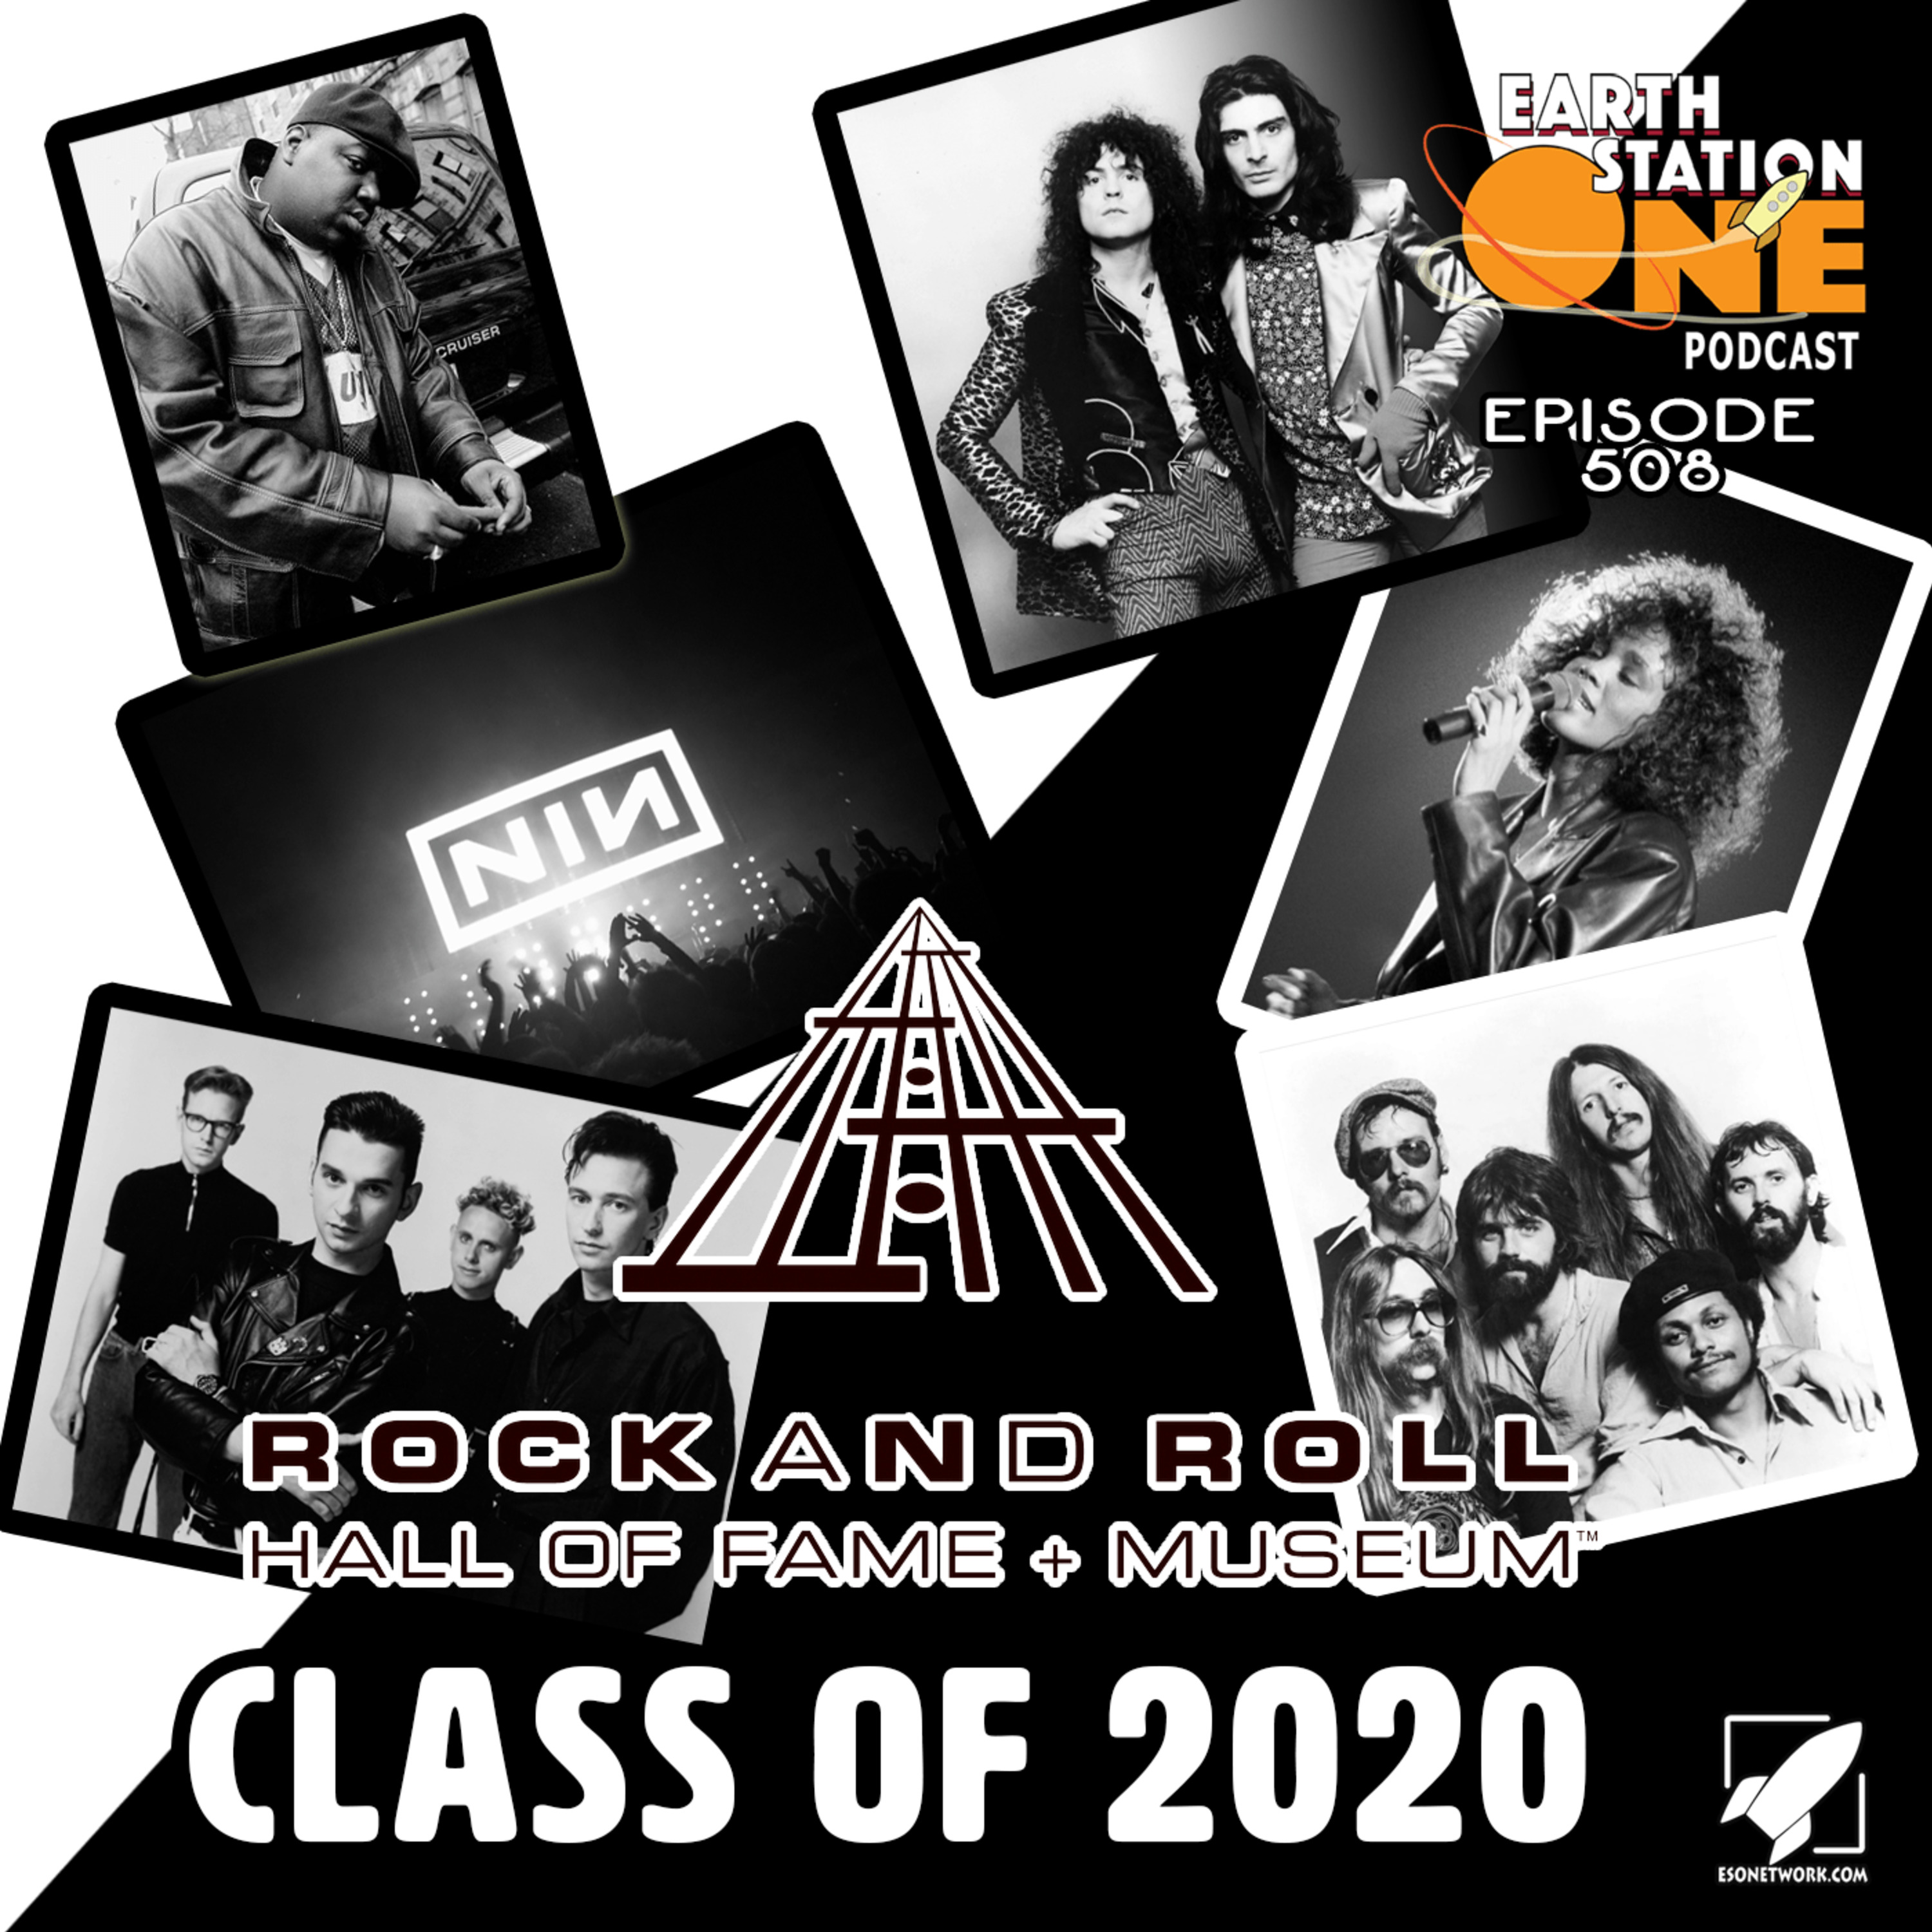 The Earth Station One Podcast – The Rock N' Roll Hall of Fame Class of 2020